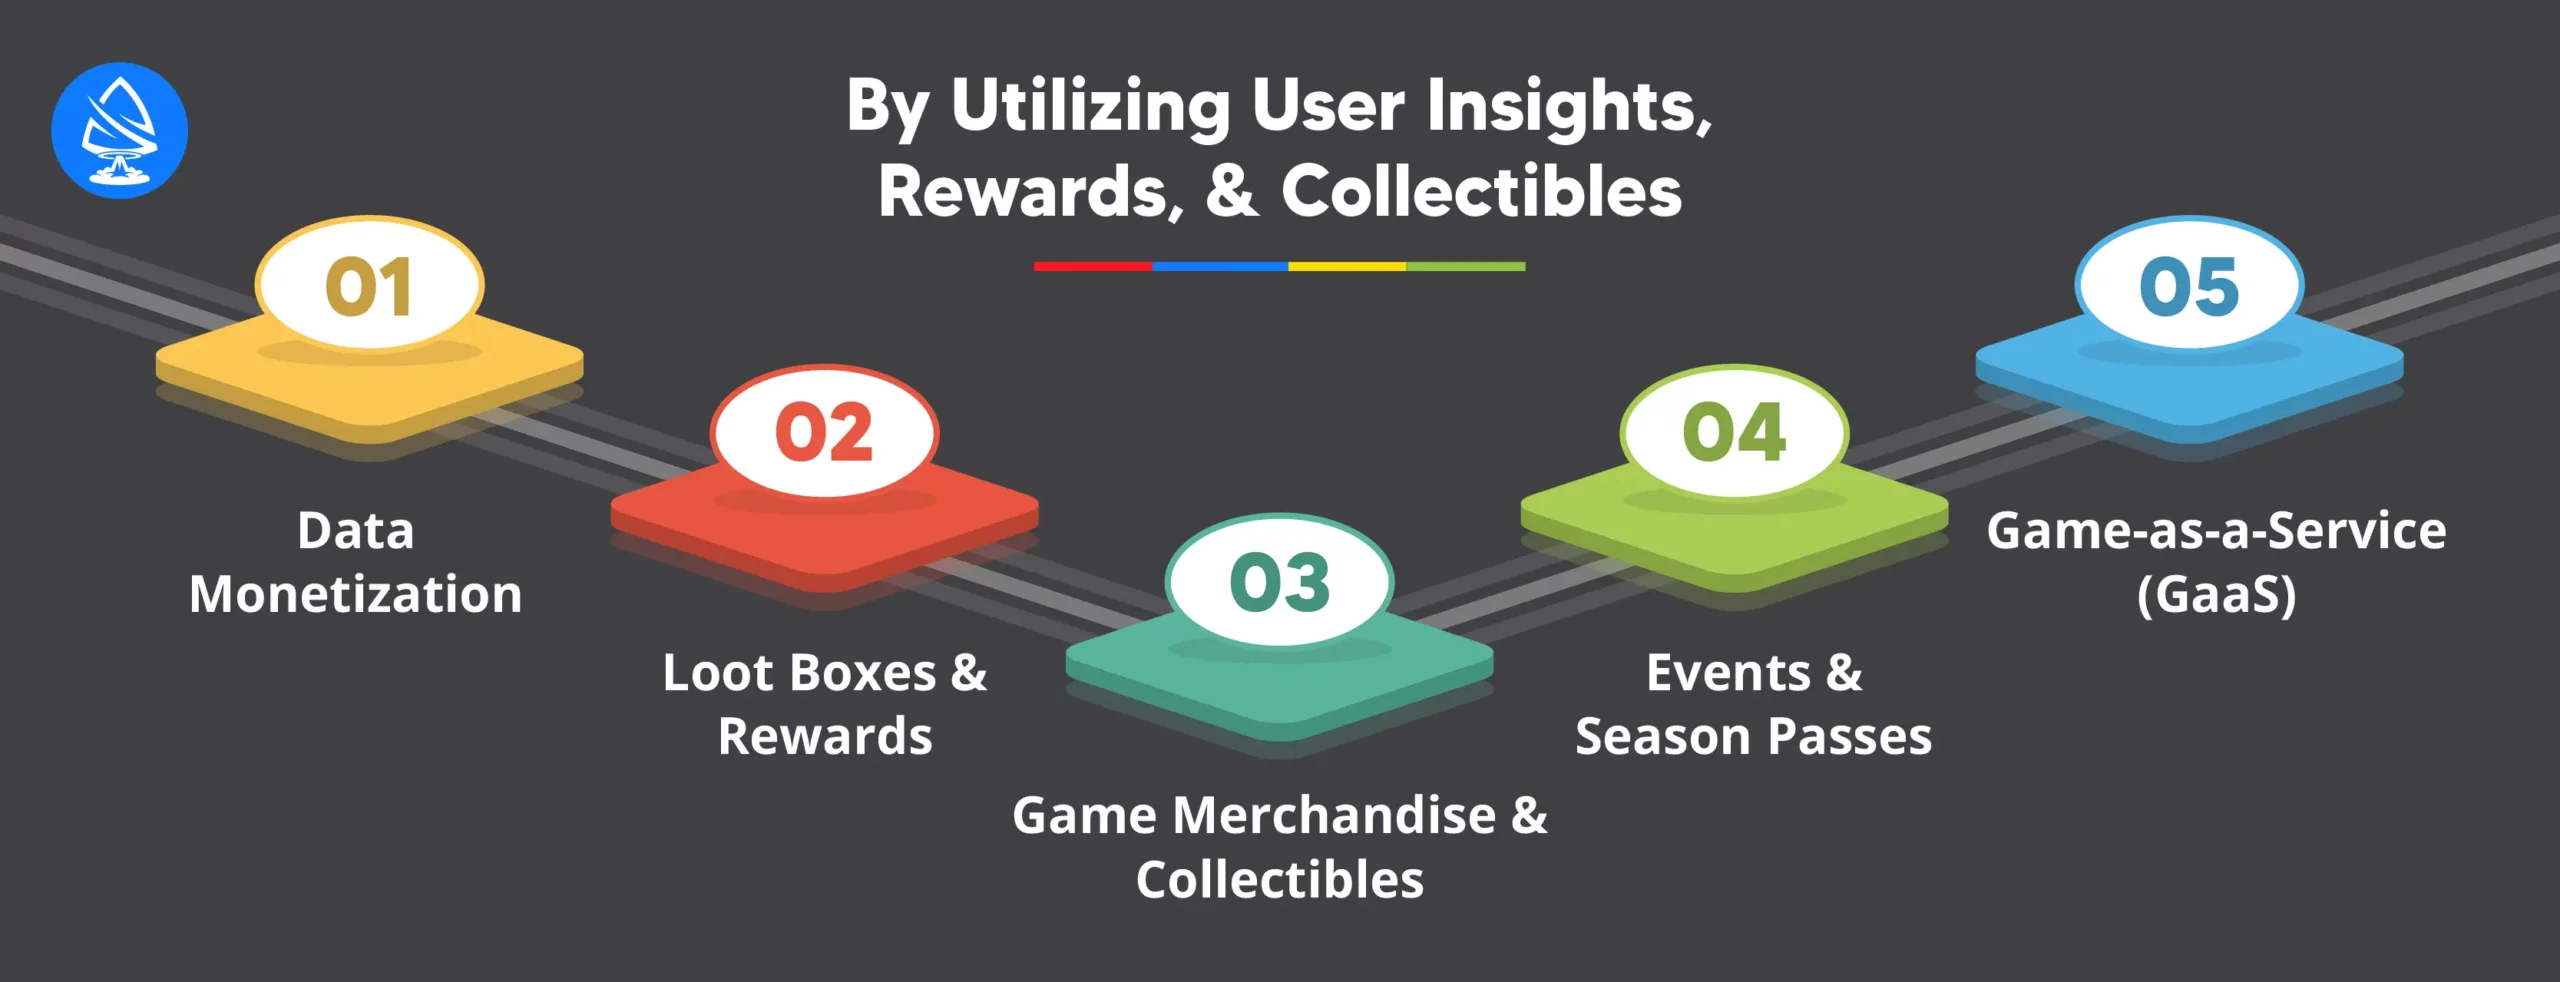 BY UTILIZING USER INSIGHTS, REWARDS, AND COLLECTIBLES